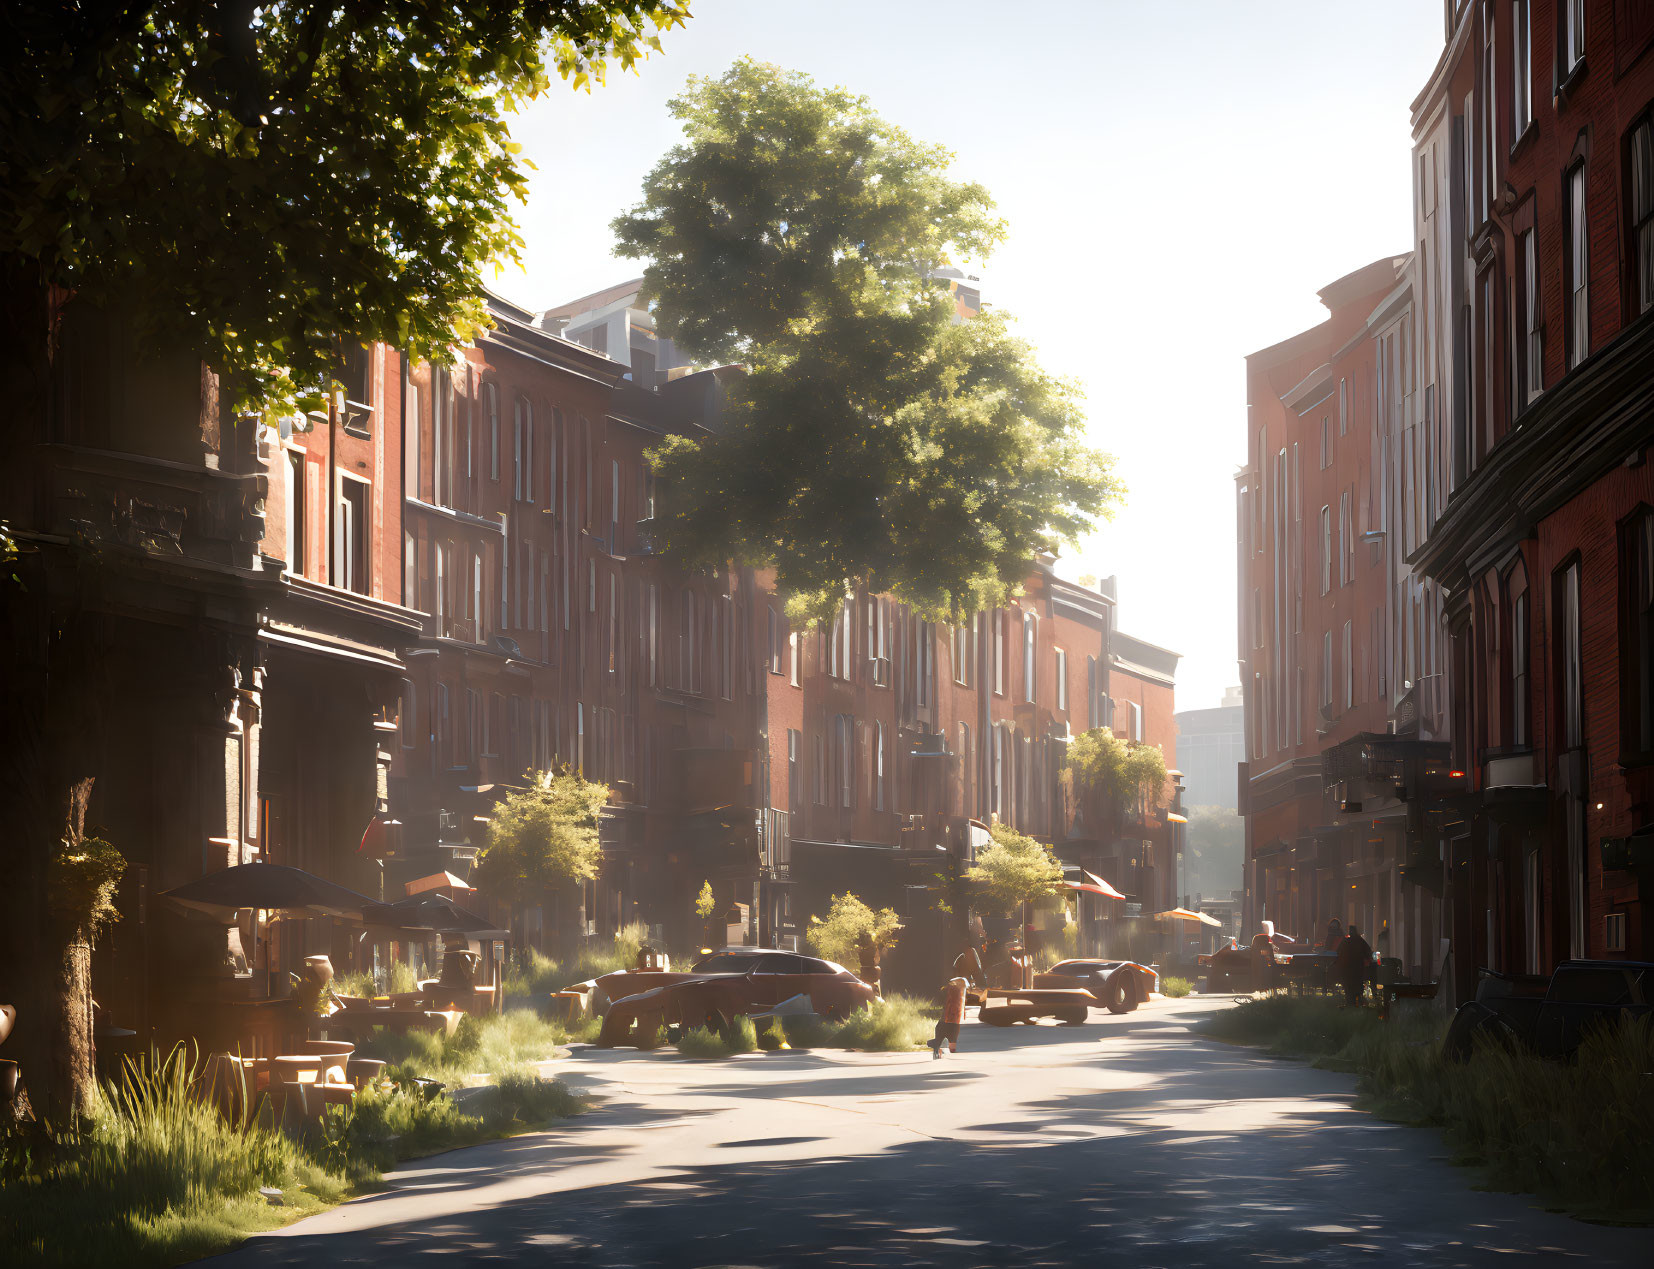 Tranquil urban street with lush trees and red brick buildings